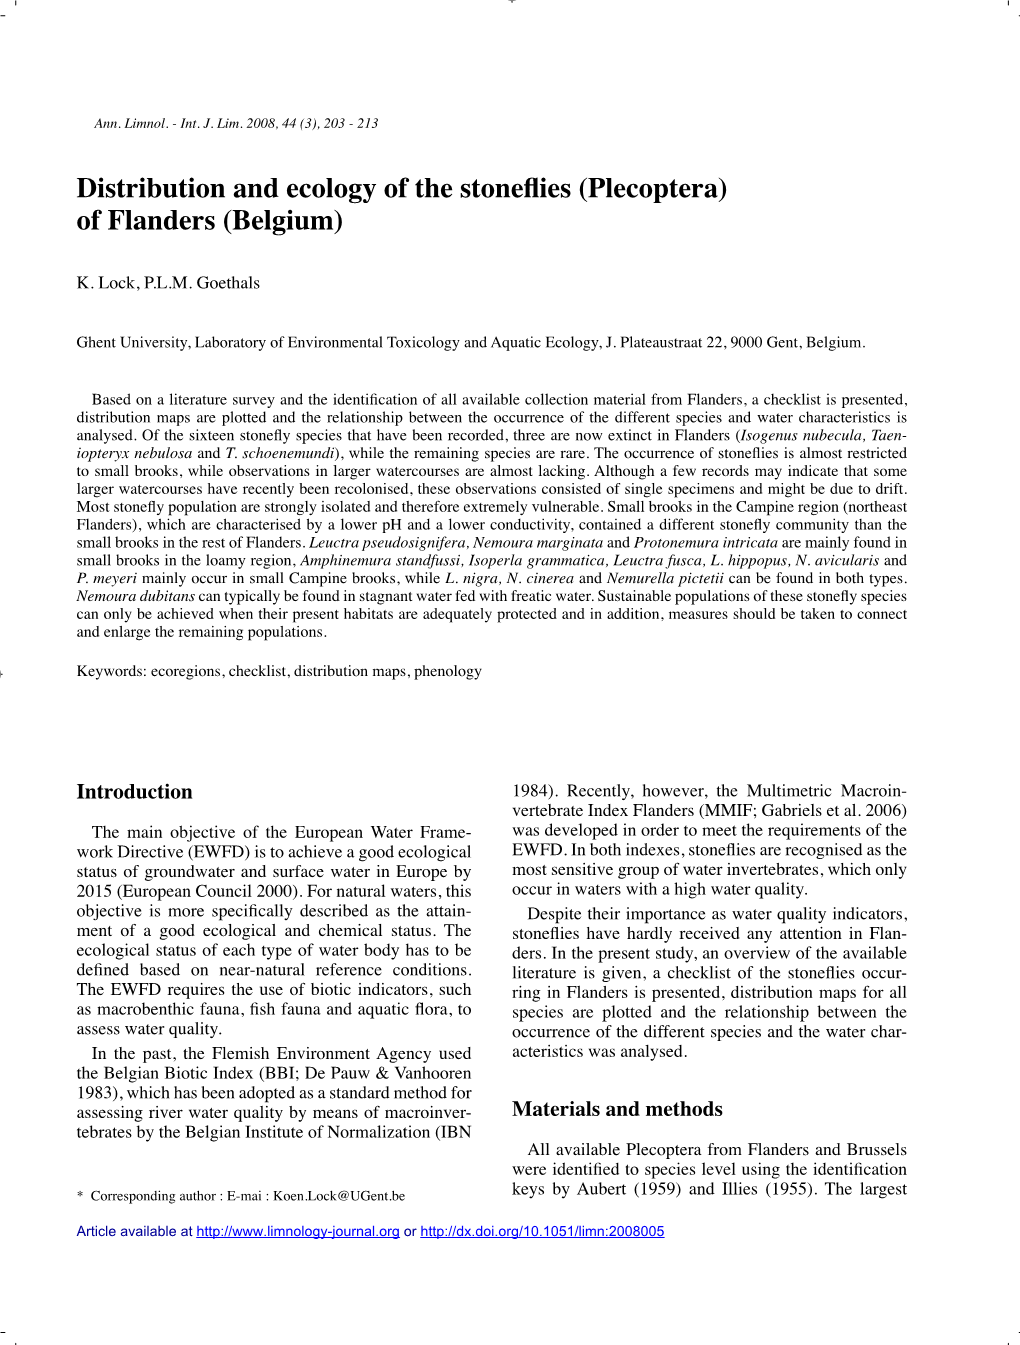 Distribution and Ecology of the Stoneflies (Plecoptera) of Flanders